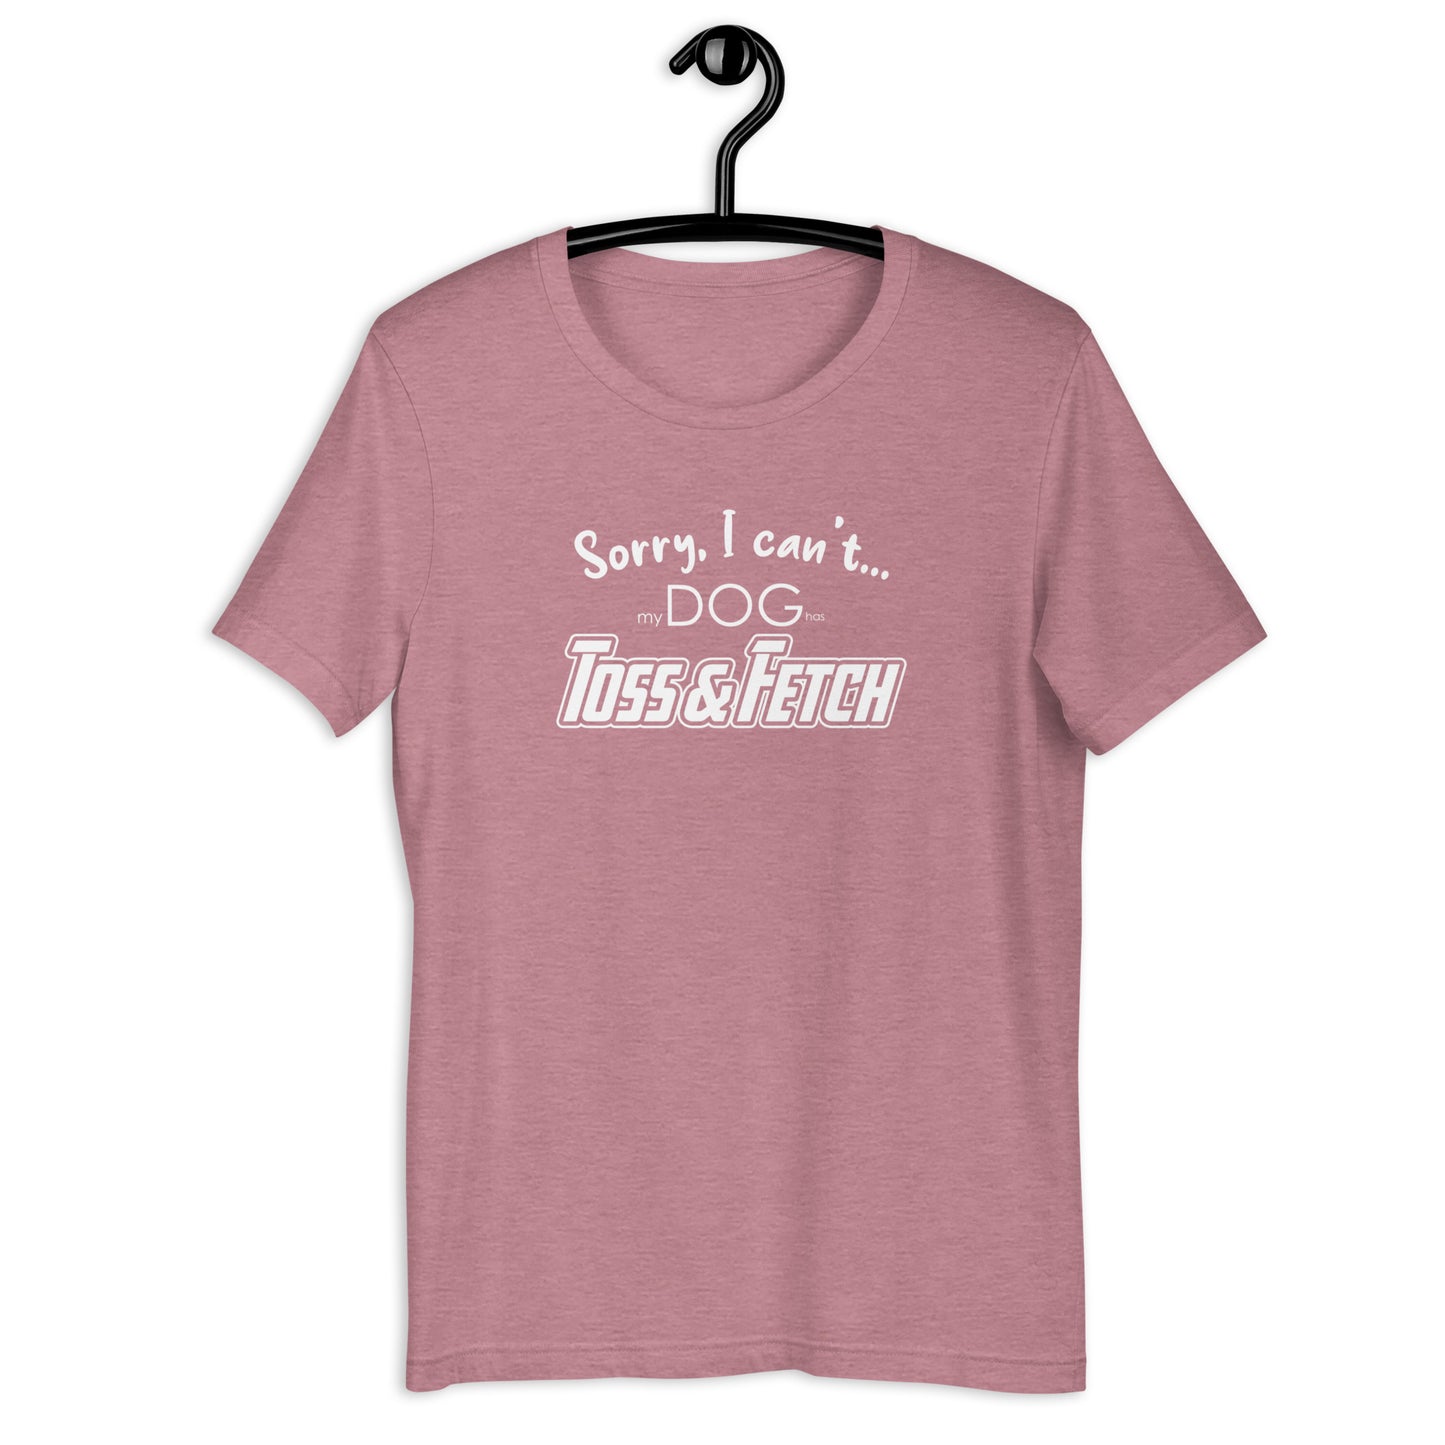 SORRY CANT - TOSS N FETCH - Unisex t-shirt